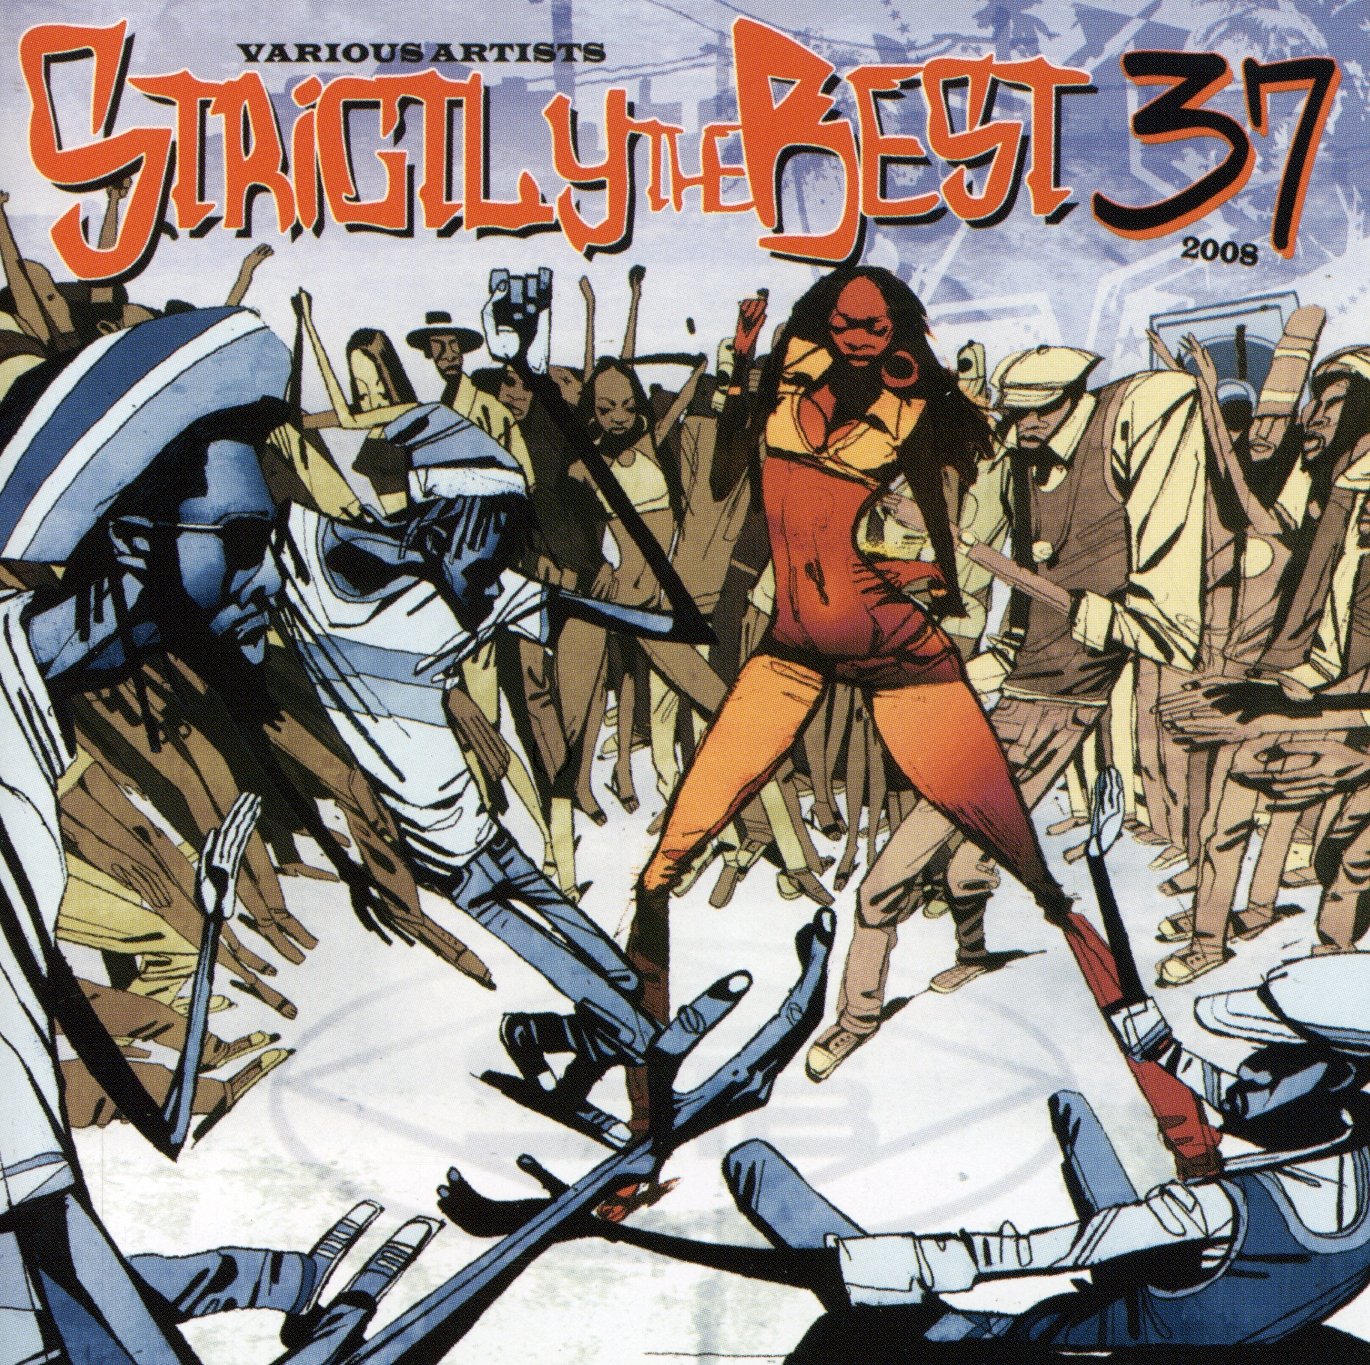 STRICTLY THE BEST 37 / VARIOUS